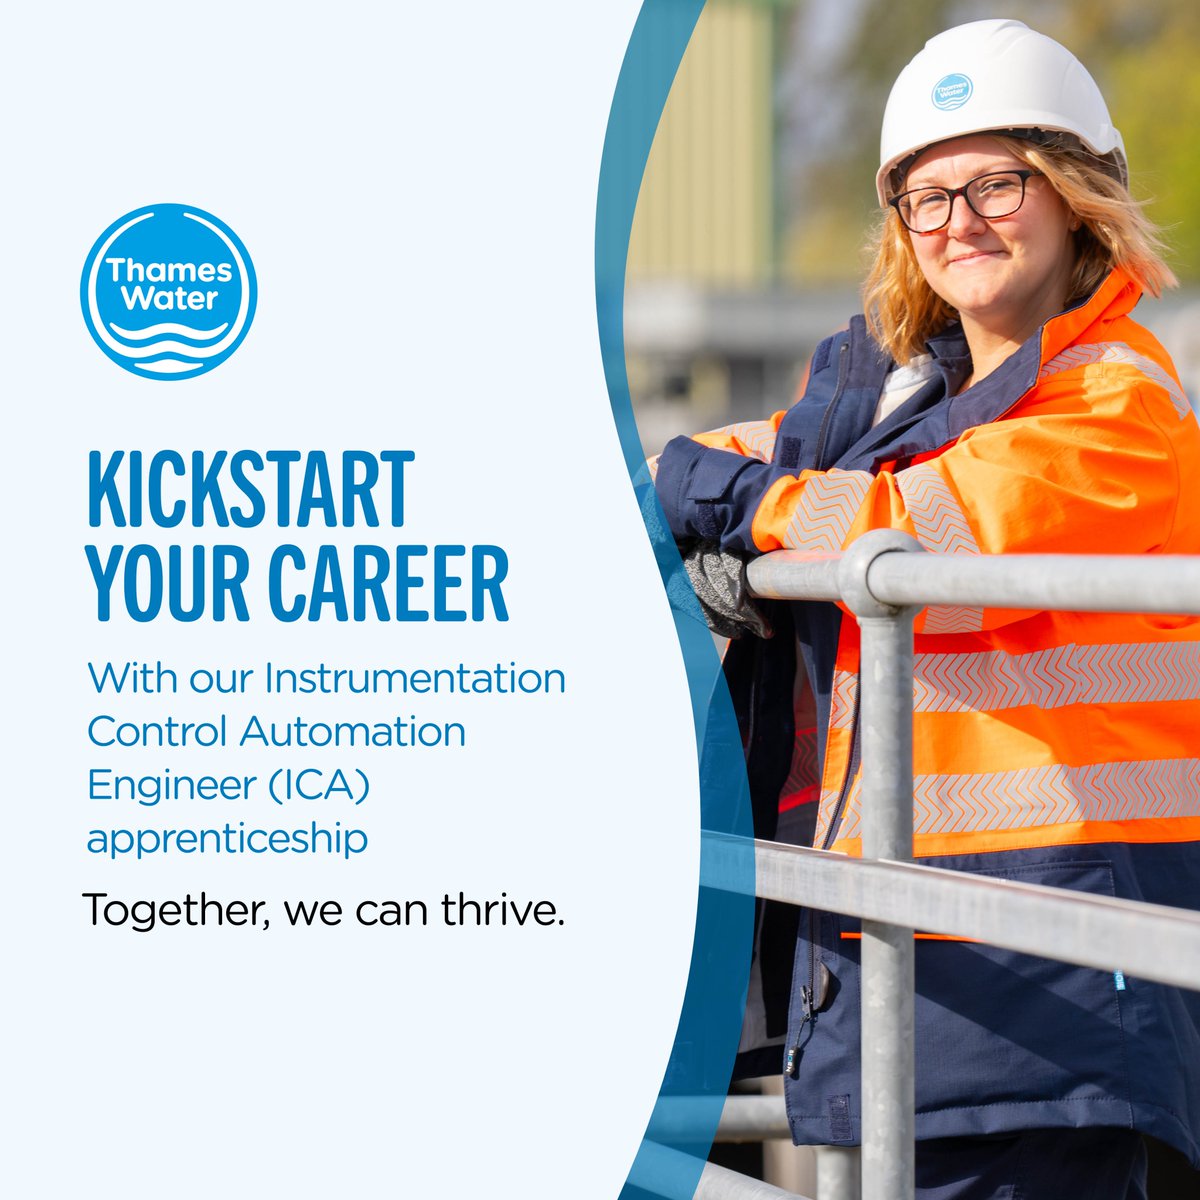 Ready for a new challenge? Take on our Level 3 apprenticeship and learn how to maintain essential equipment and complex technical systems on site 👩‍🔧 Apply now at jobs.thameswater.co.uk/Search.aspx?Cl…